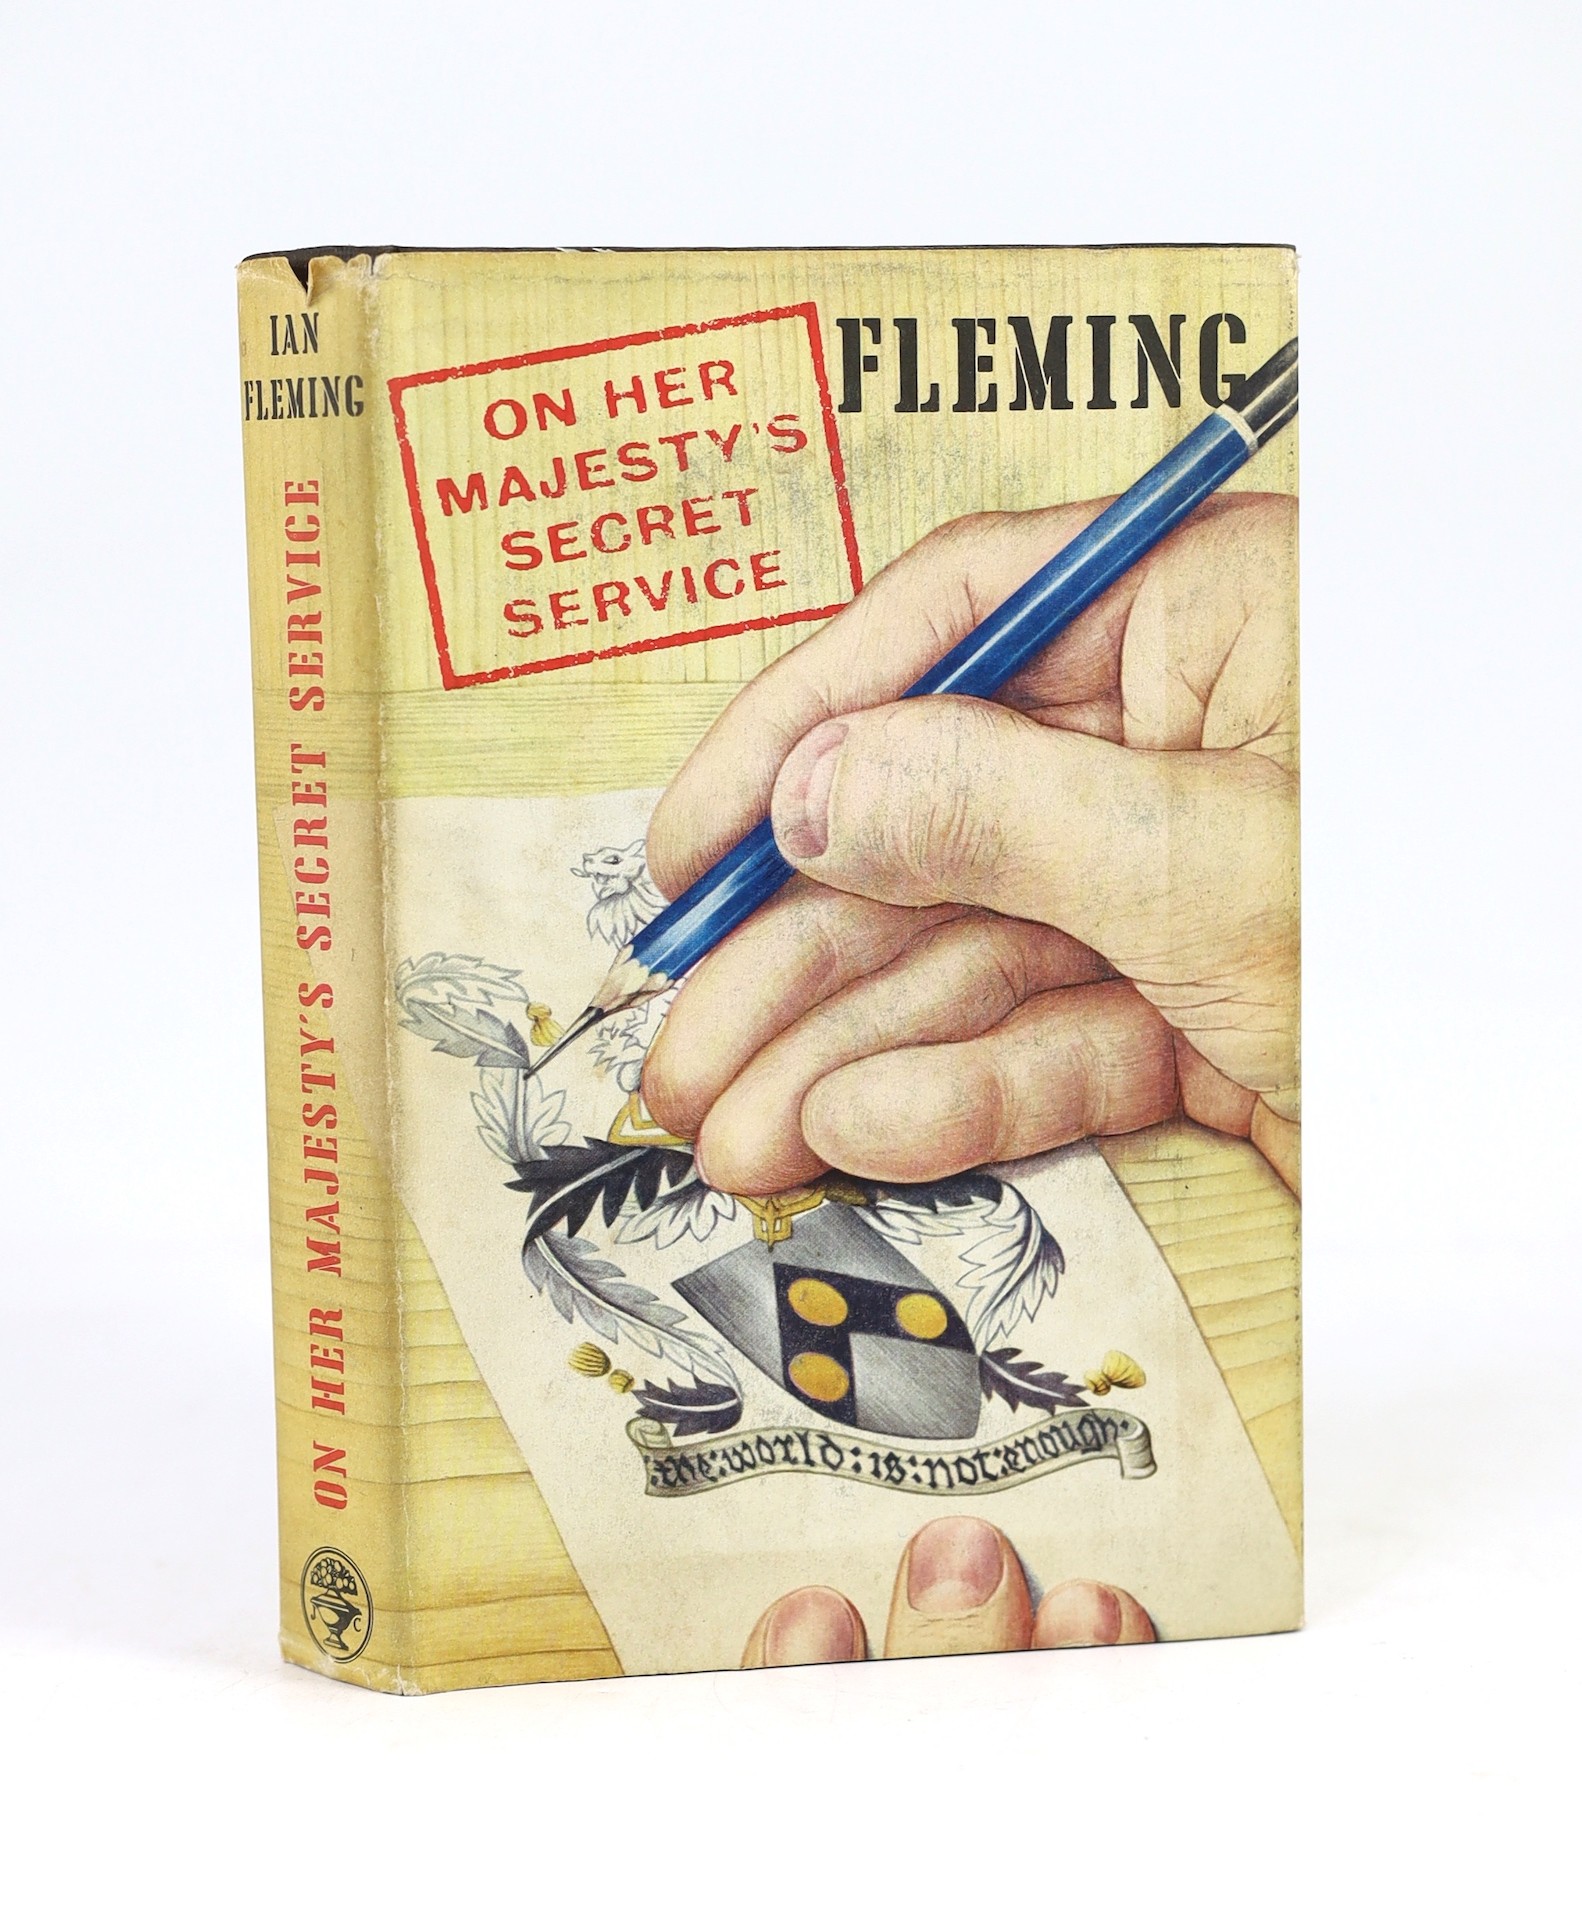 Fleming, Ian - On Her Majesty’s Secret Service, 1st edition, 8vo, cloth in unclipped d/j, Jonathan Cape, London, 1963